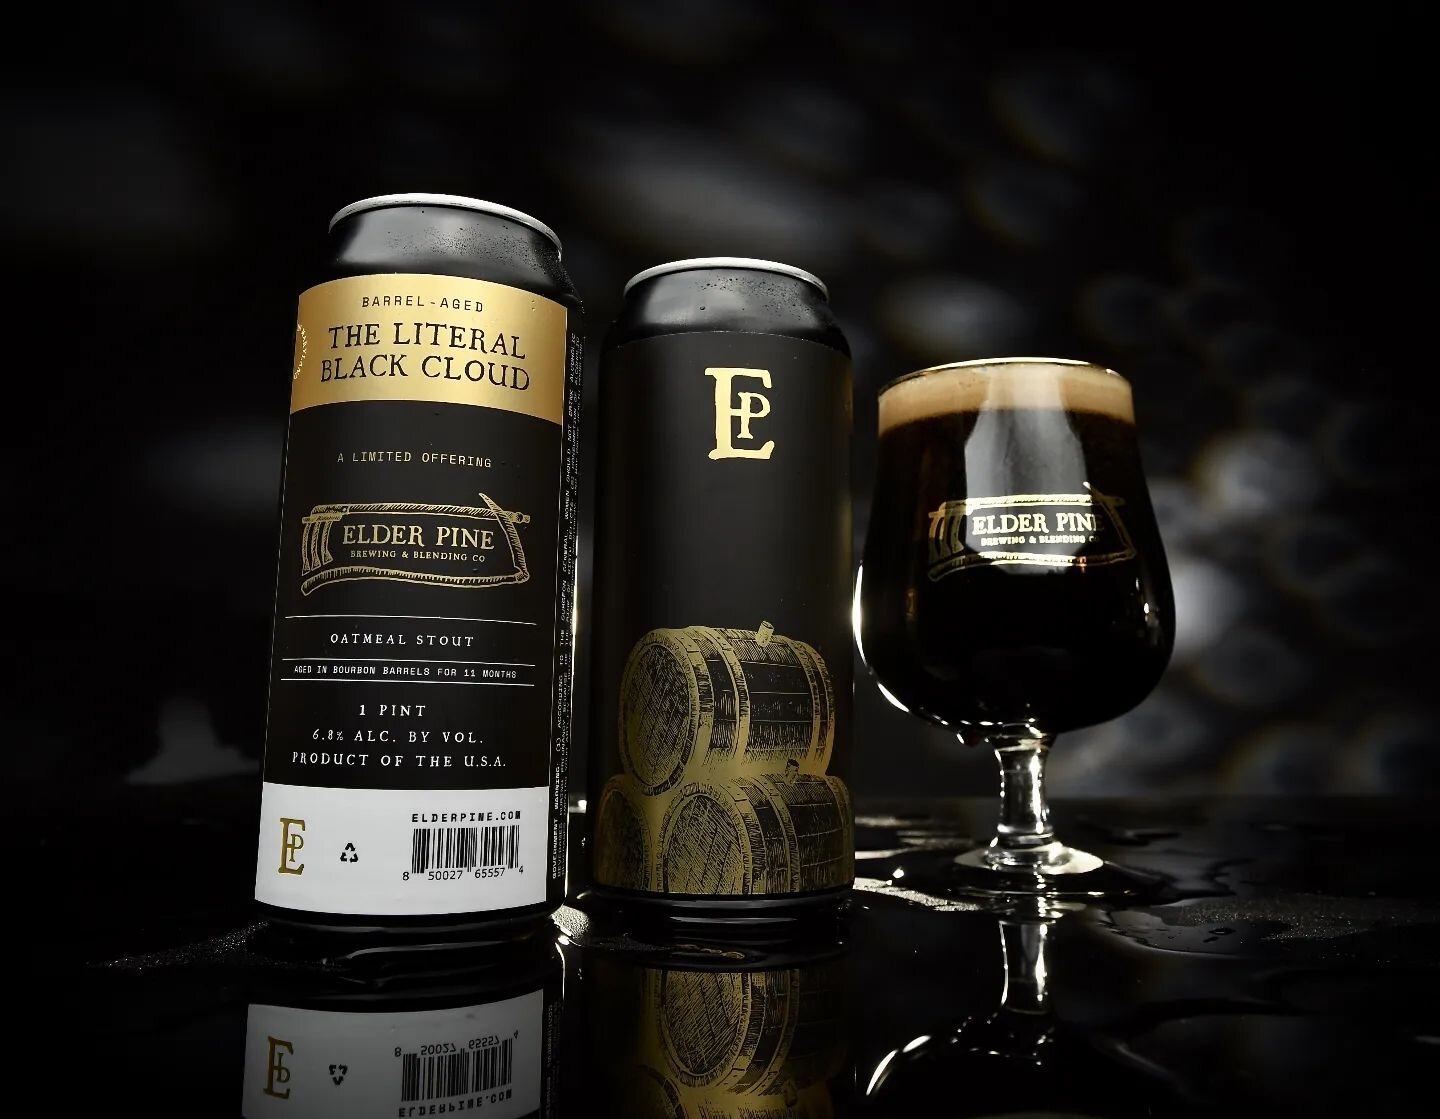 BARREL-AGED THE LITERAL BLACK CLOUD
BBA Oatmeal Stout
6.8% abv

Toward the end of last year, we stashed some of our 'The Literal Black Cloud' Oatmeal Stout in Boone County Bourbon barrels for extensive aging. After over 11 months in barrels, this lus